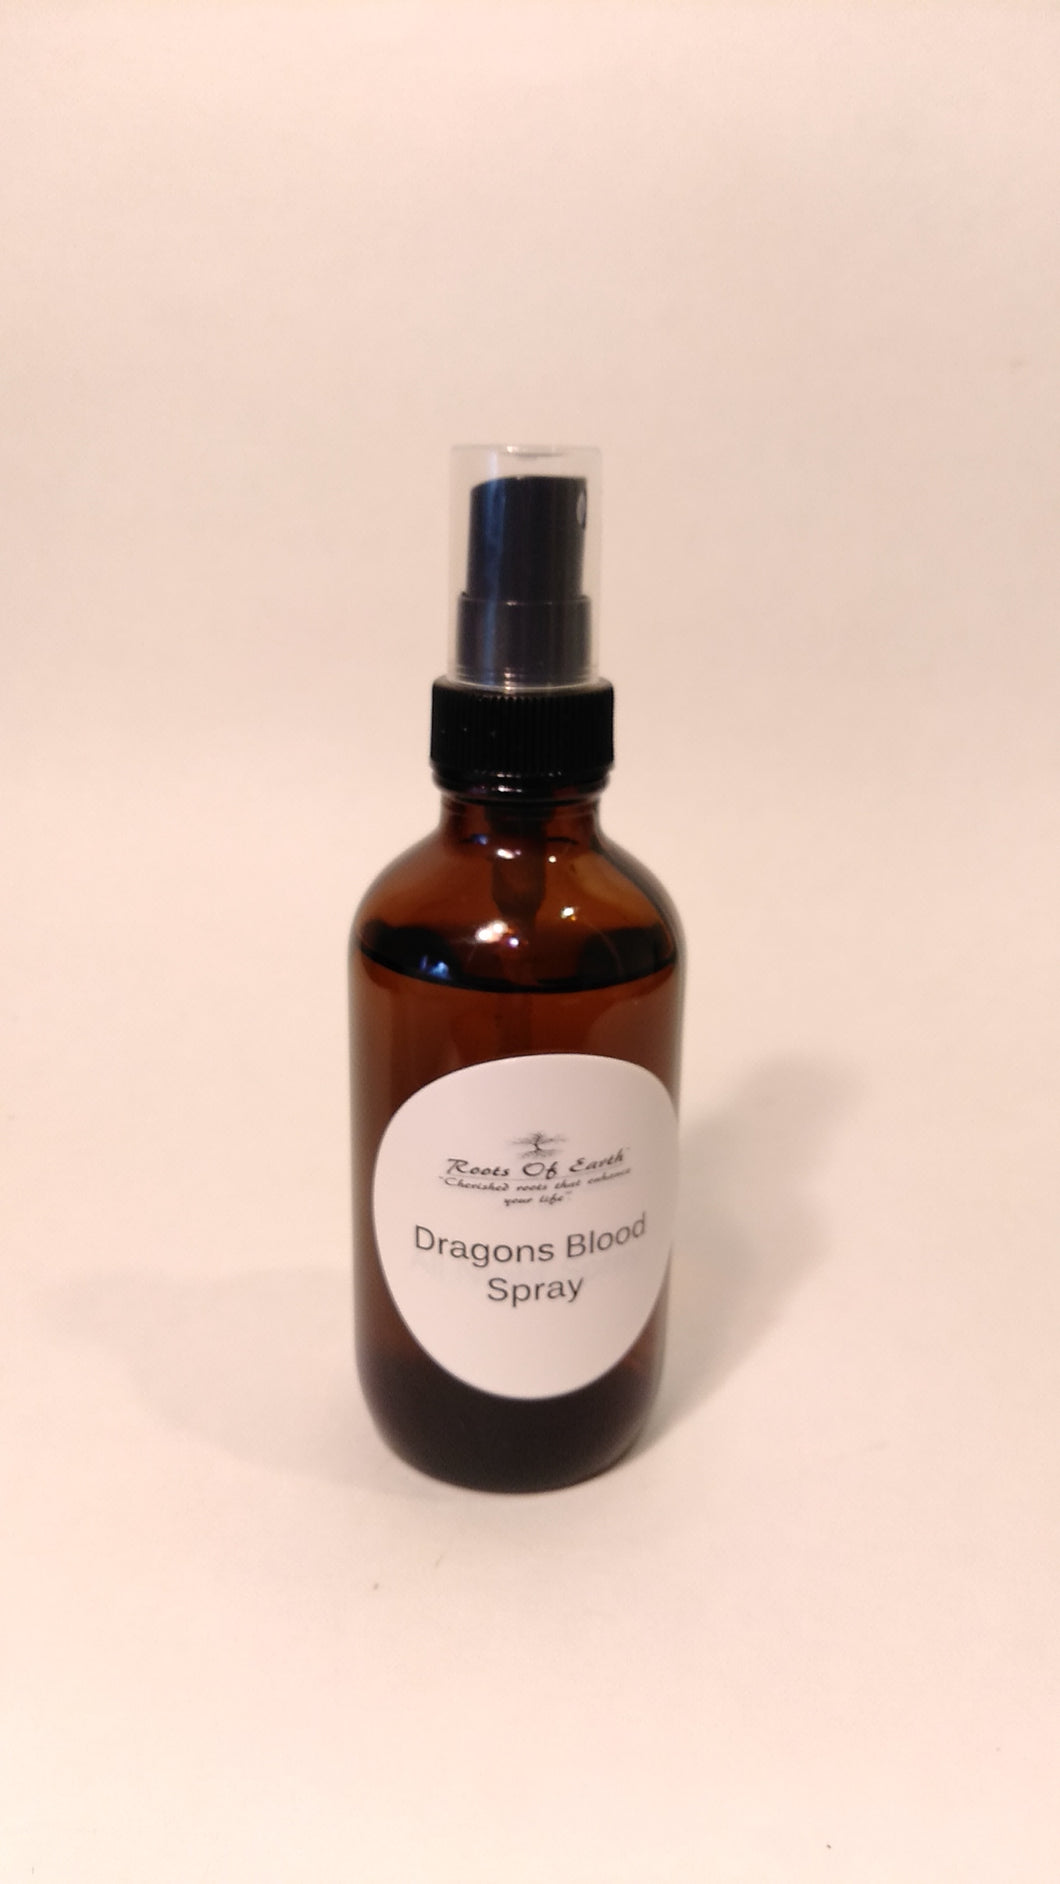 Dragons Blood Body Spray or Room Wealth Power Queendom By Roots Of Earth